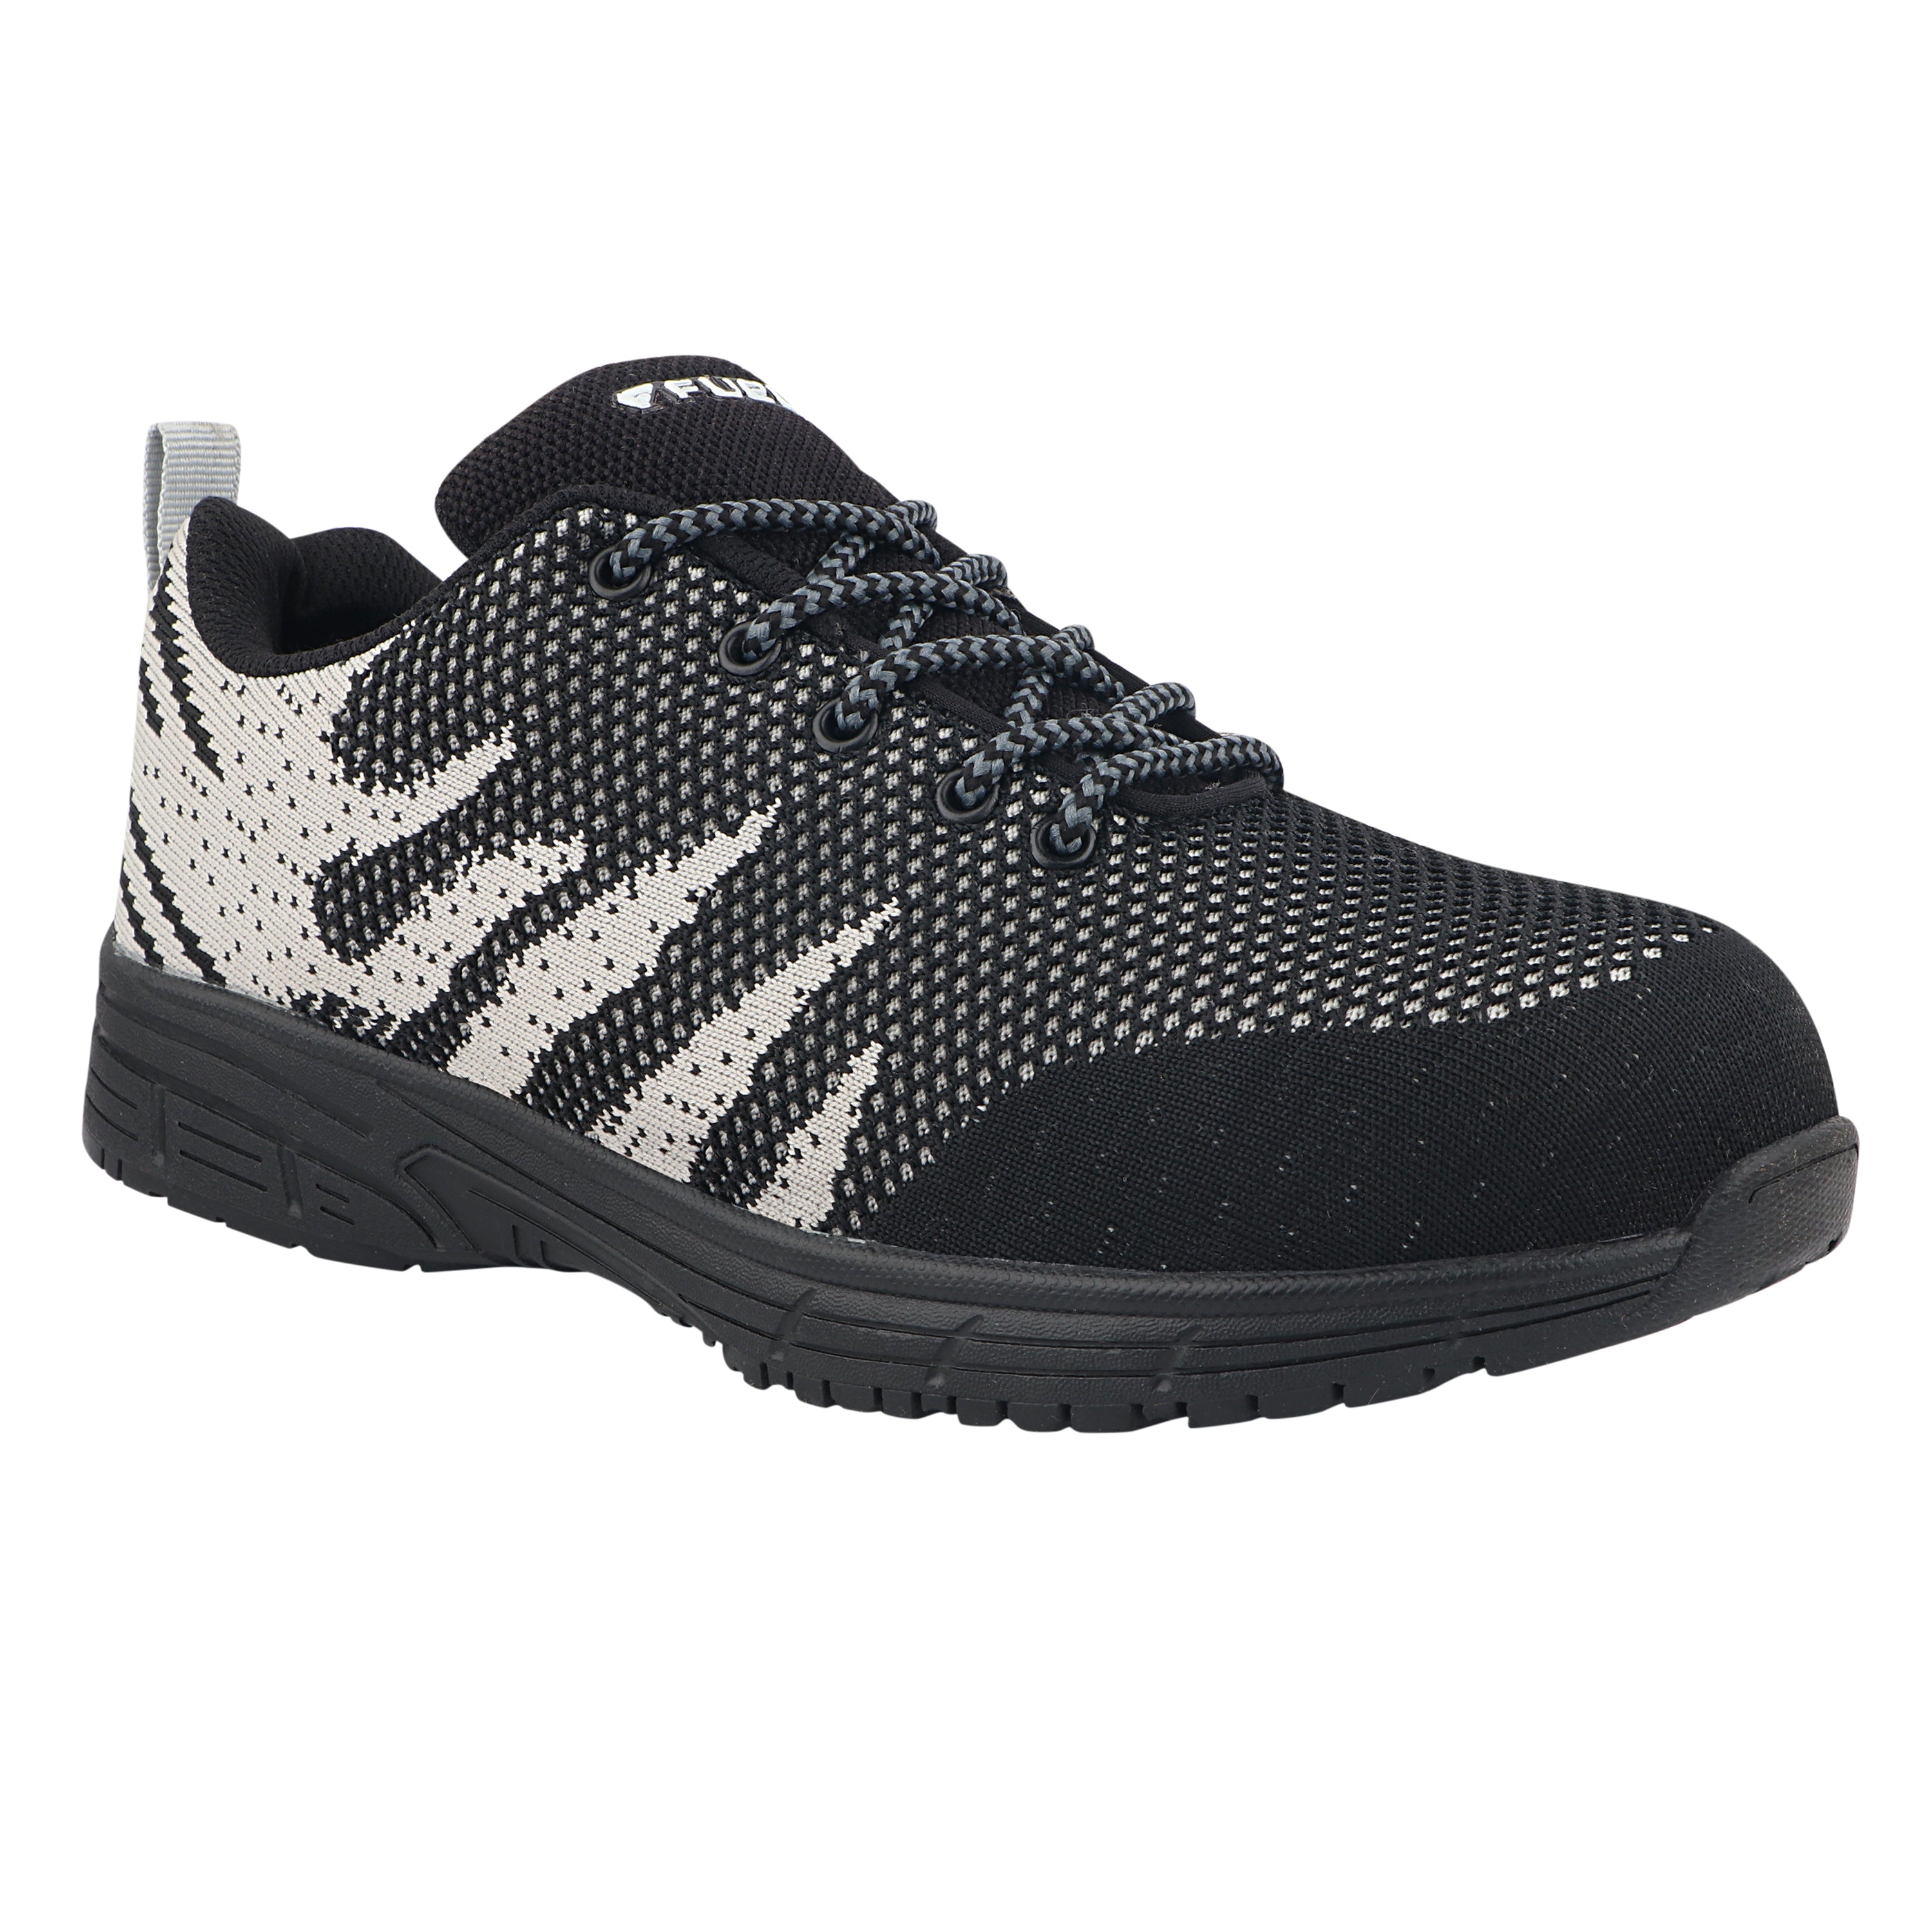 Fuel Gracy Sporty Design Knitted Fabric Breathable Mesh Lining Safety Shoes for Men's Steel Toe Cap With Rubber Sole (Blk-Grey)